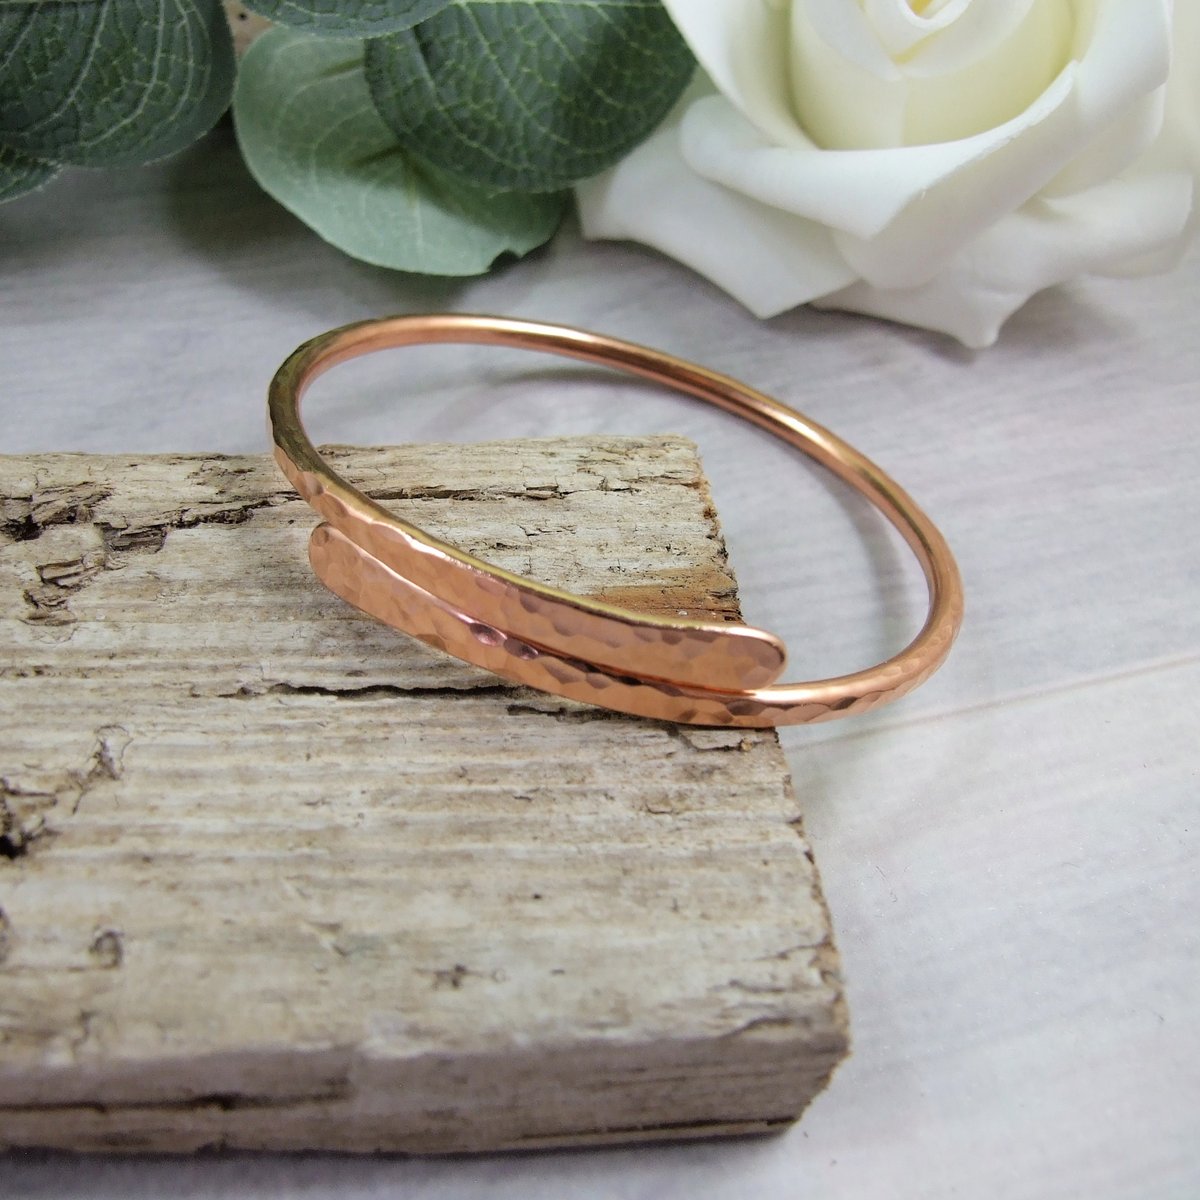 Copper Simple Hammered Bangle Stamped Heart and... - Folksy folksy.com/items/8335801-… #newonfolksy #CGArtisans